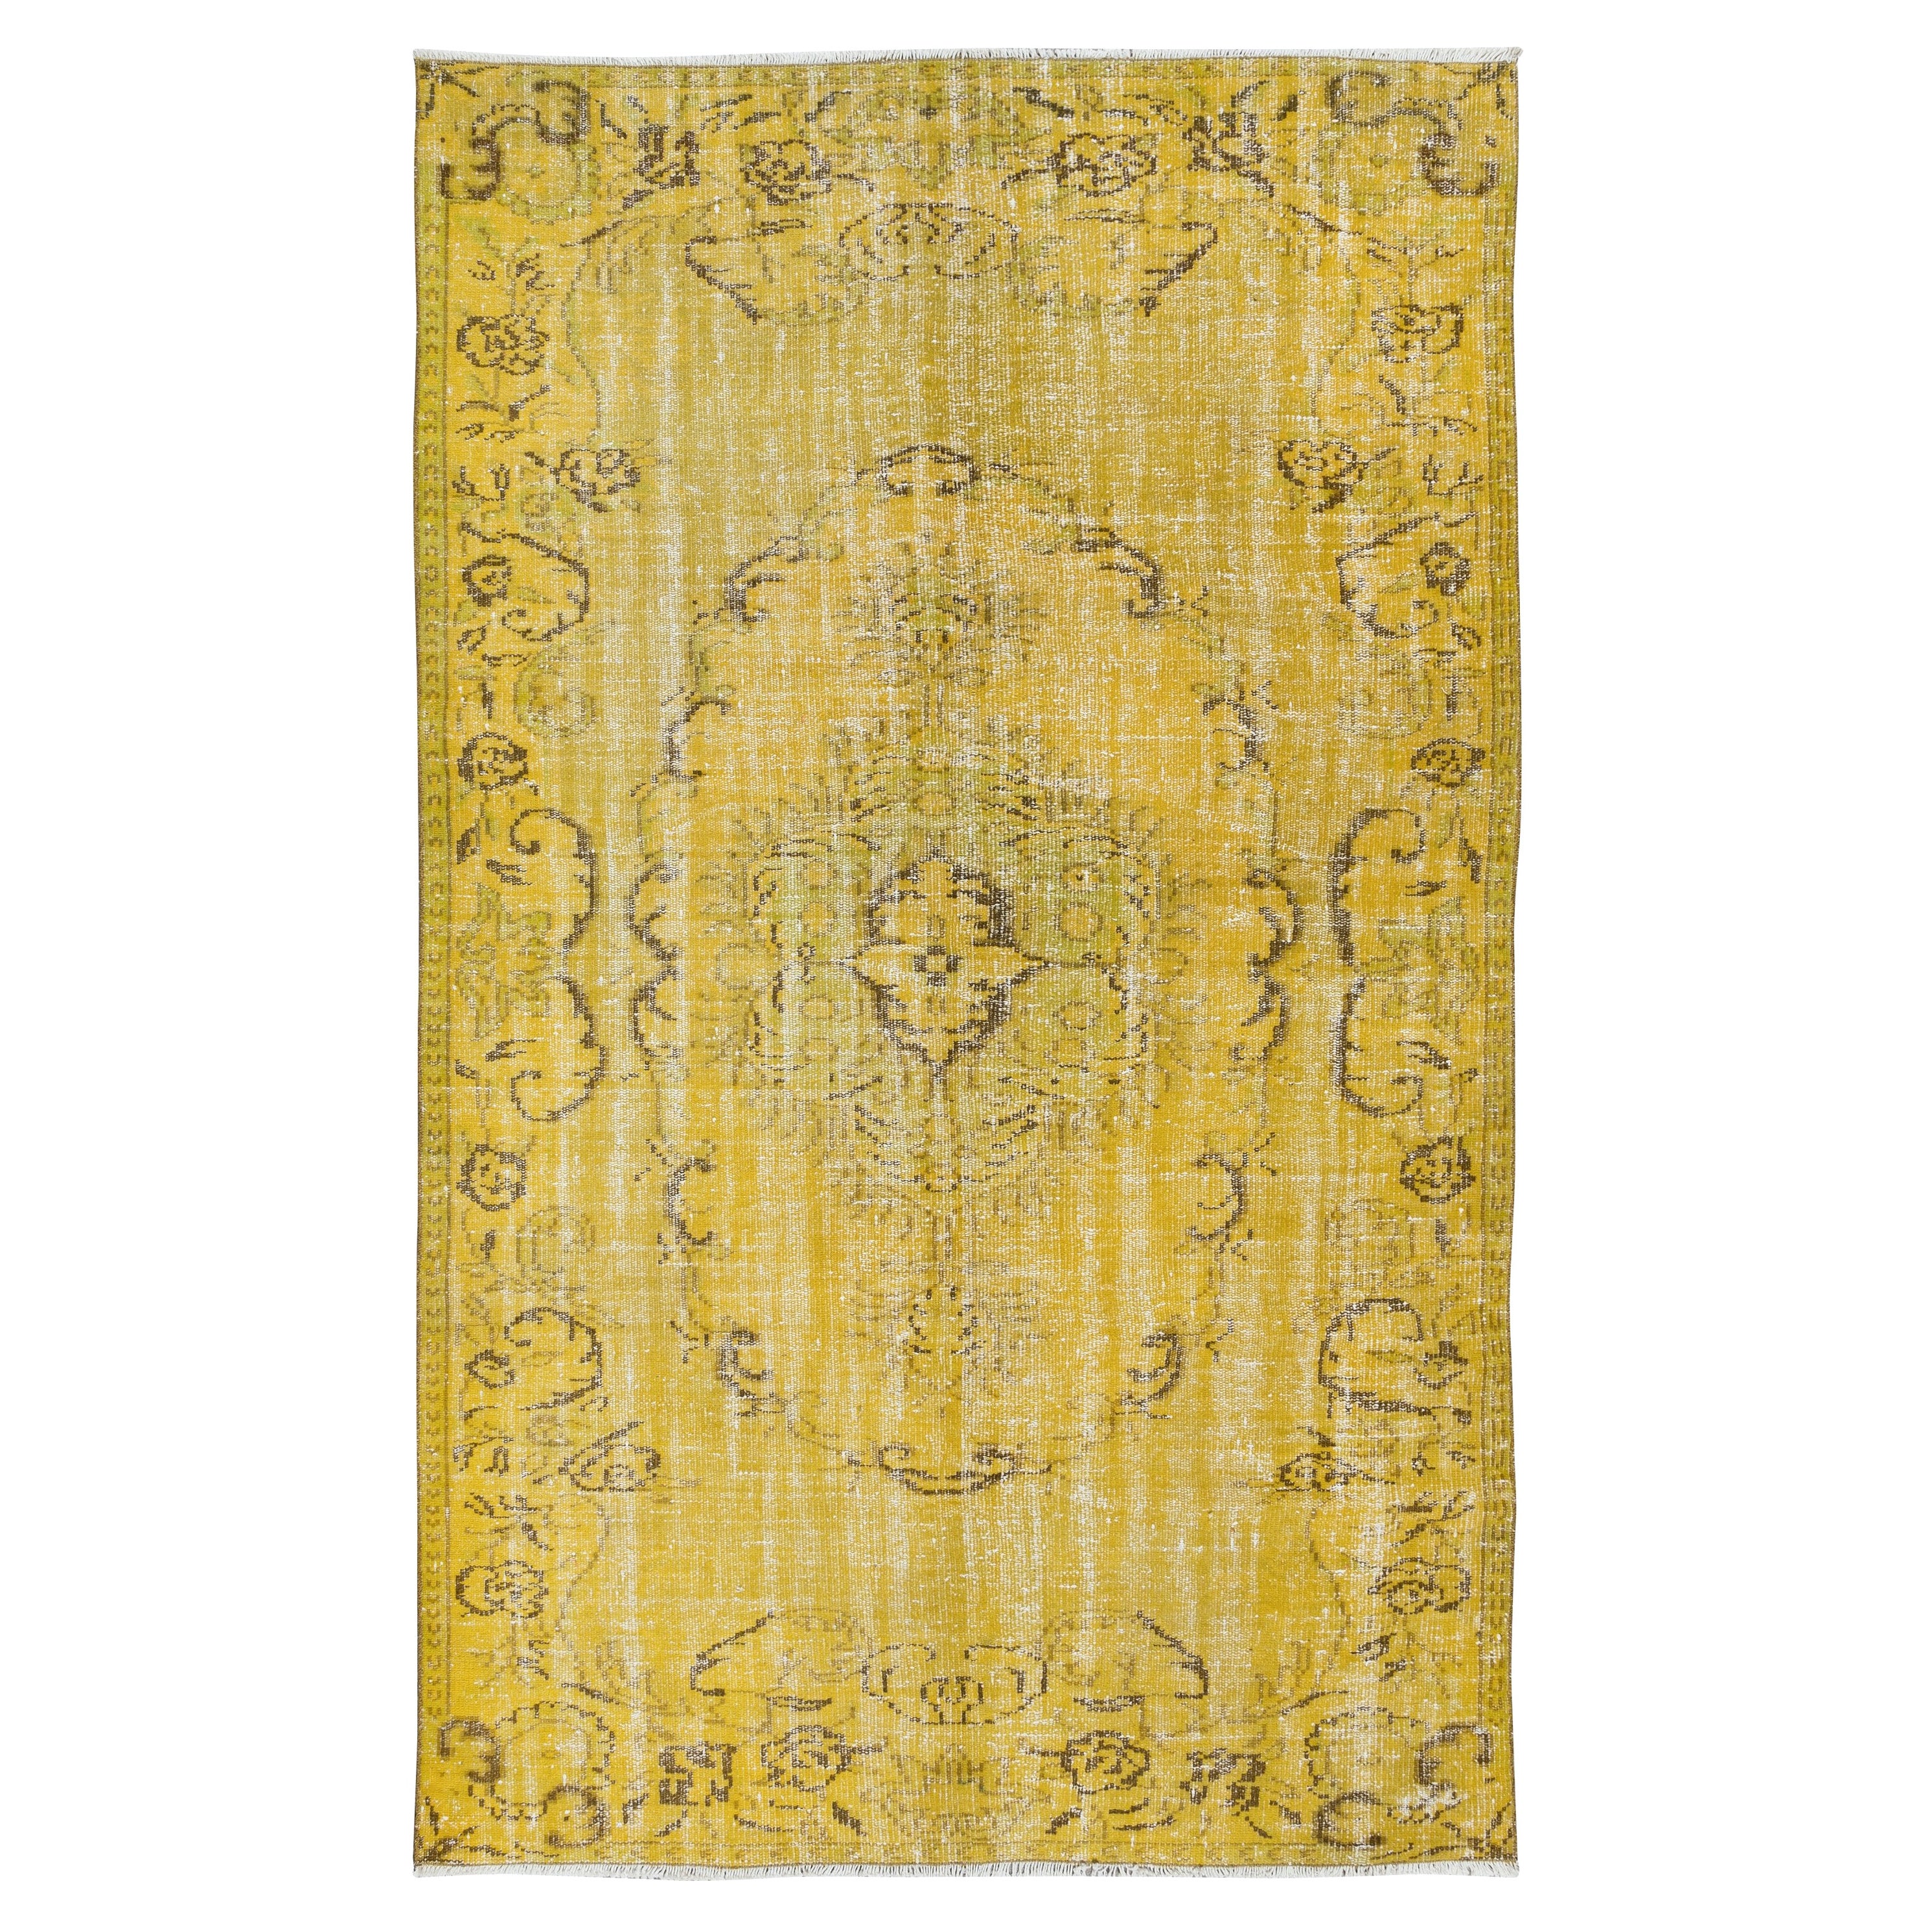 5.4x8.6 Ft Upcycled Handmade Turkish Area Rug, Yellow Over-Dyed Wool Carpet